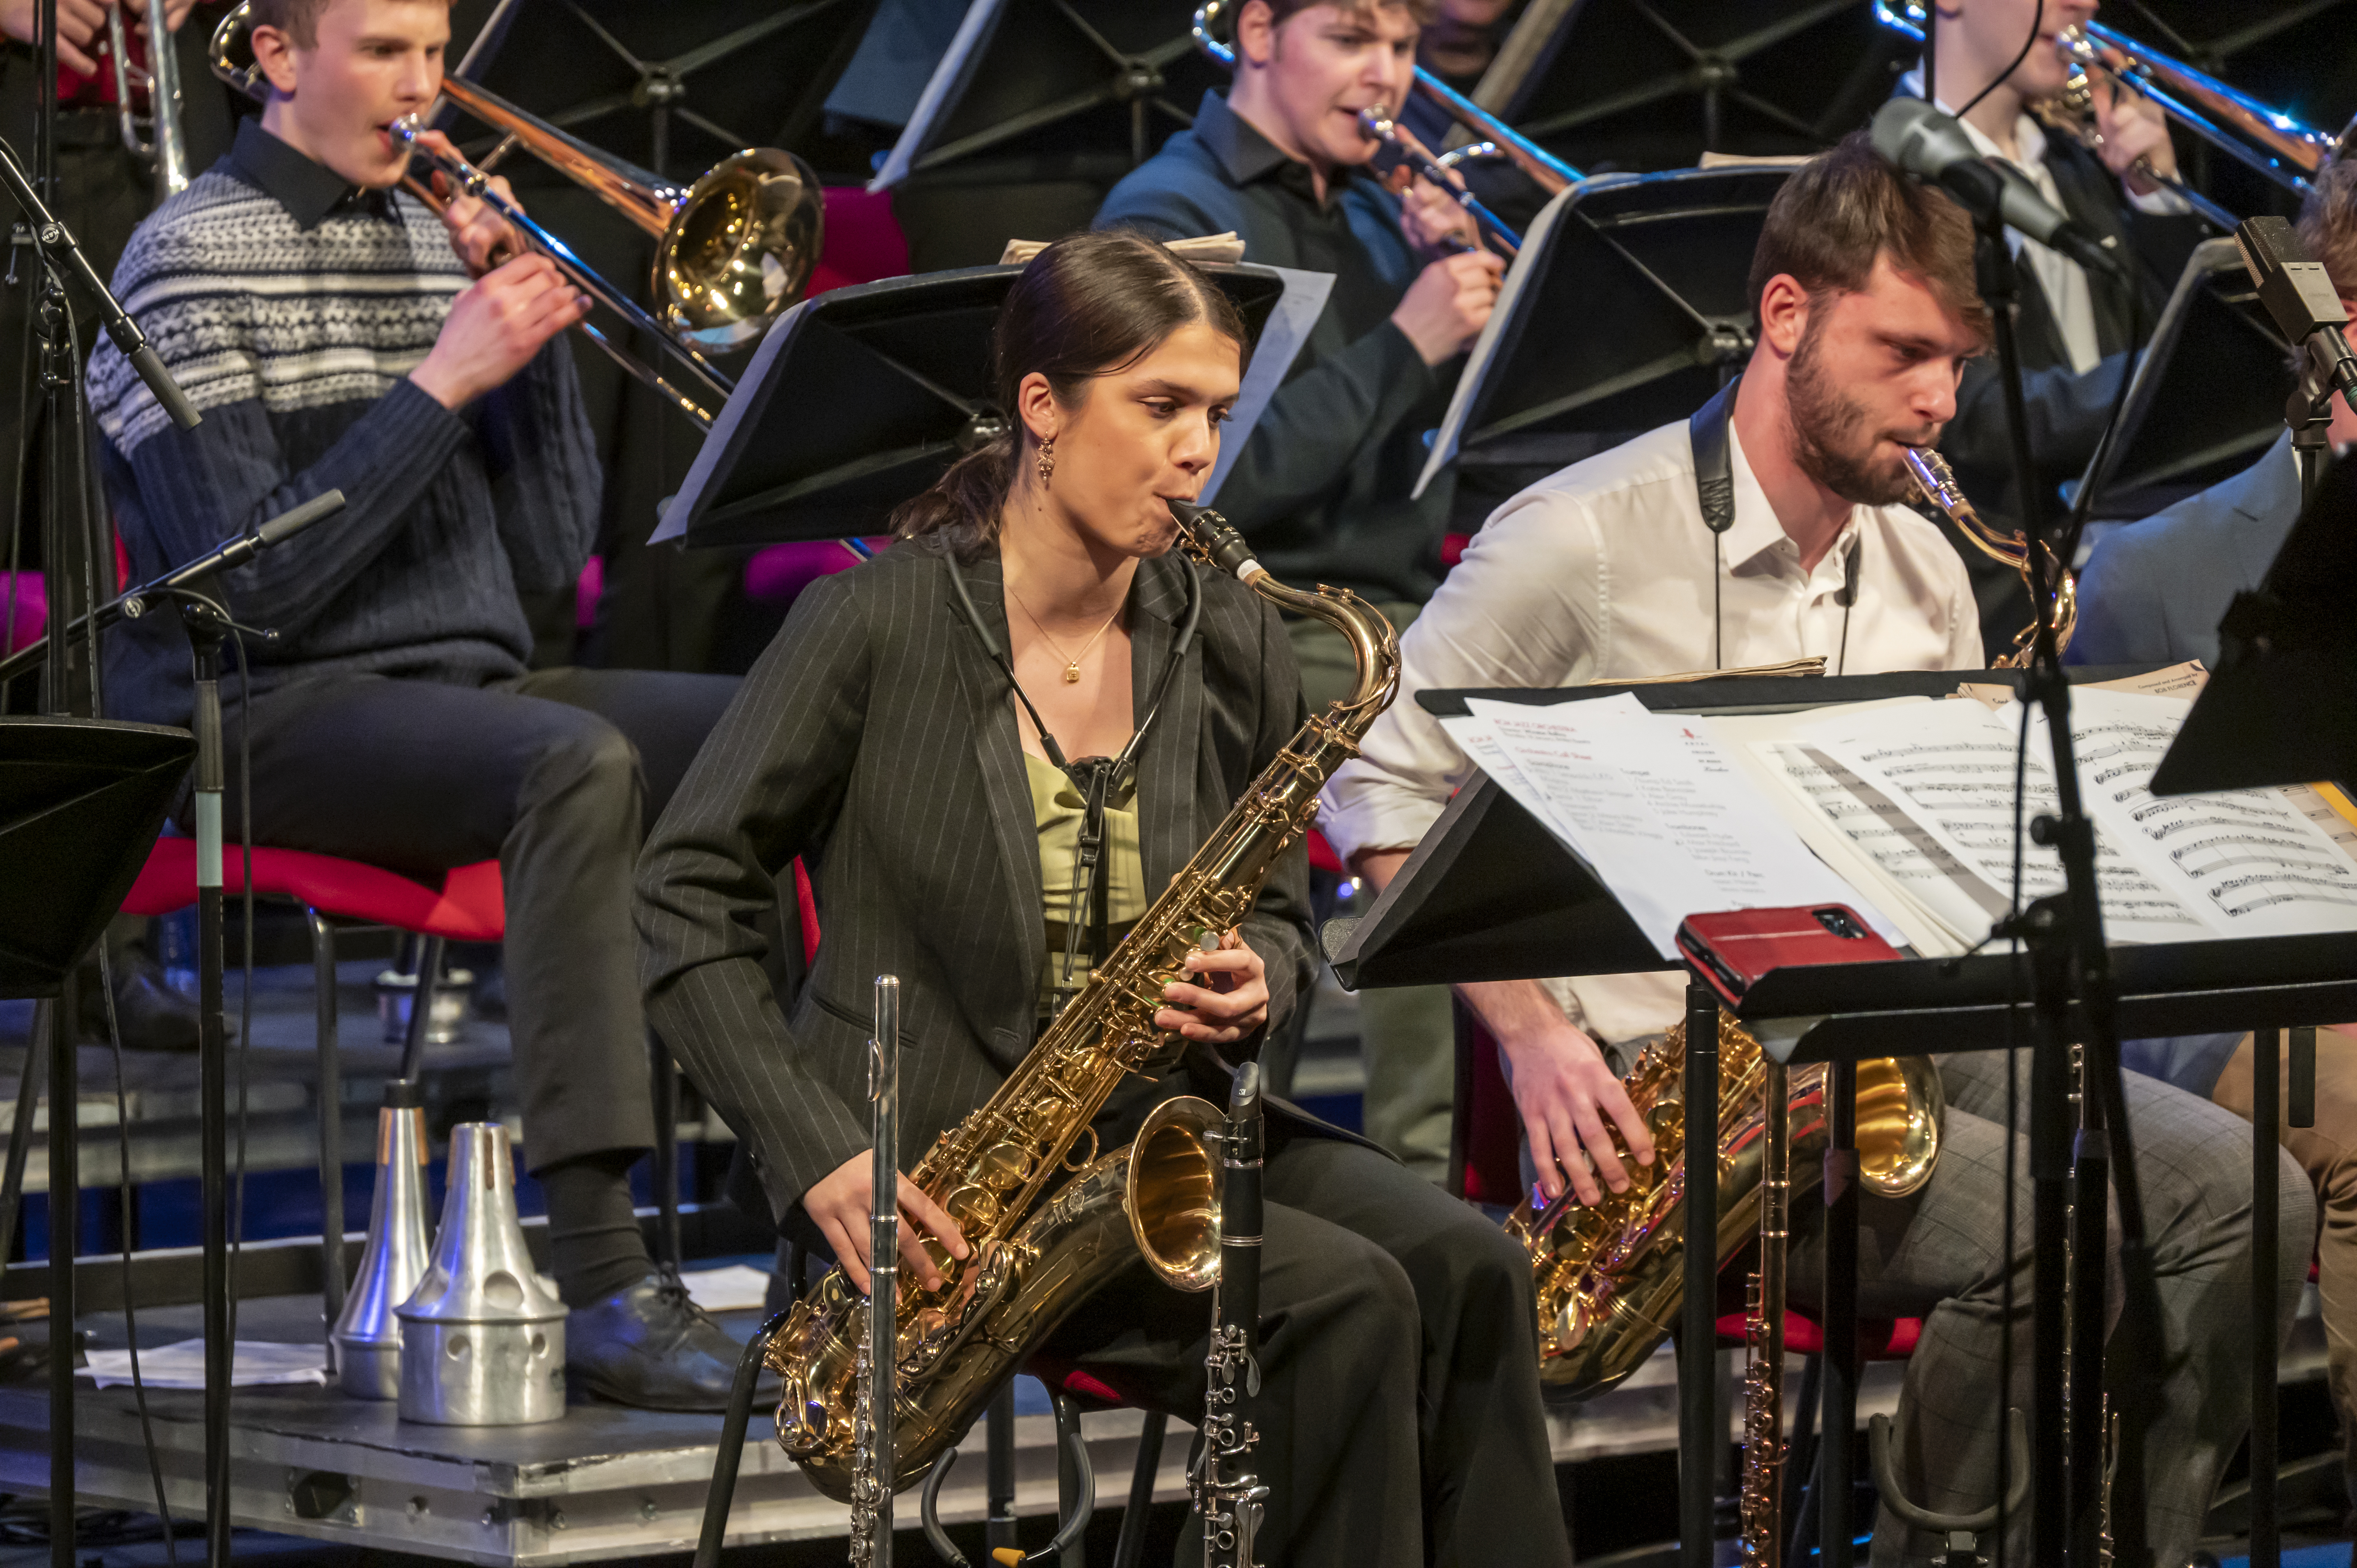 Jazz musicians performing on stage in the Britten Theatre